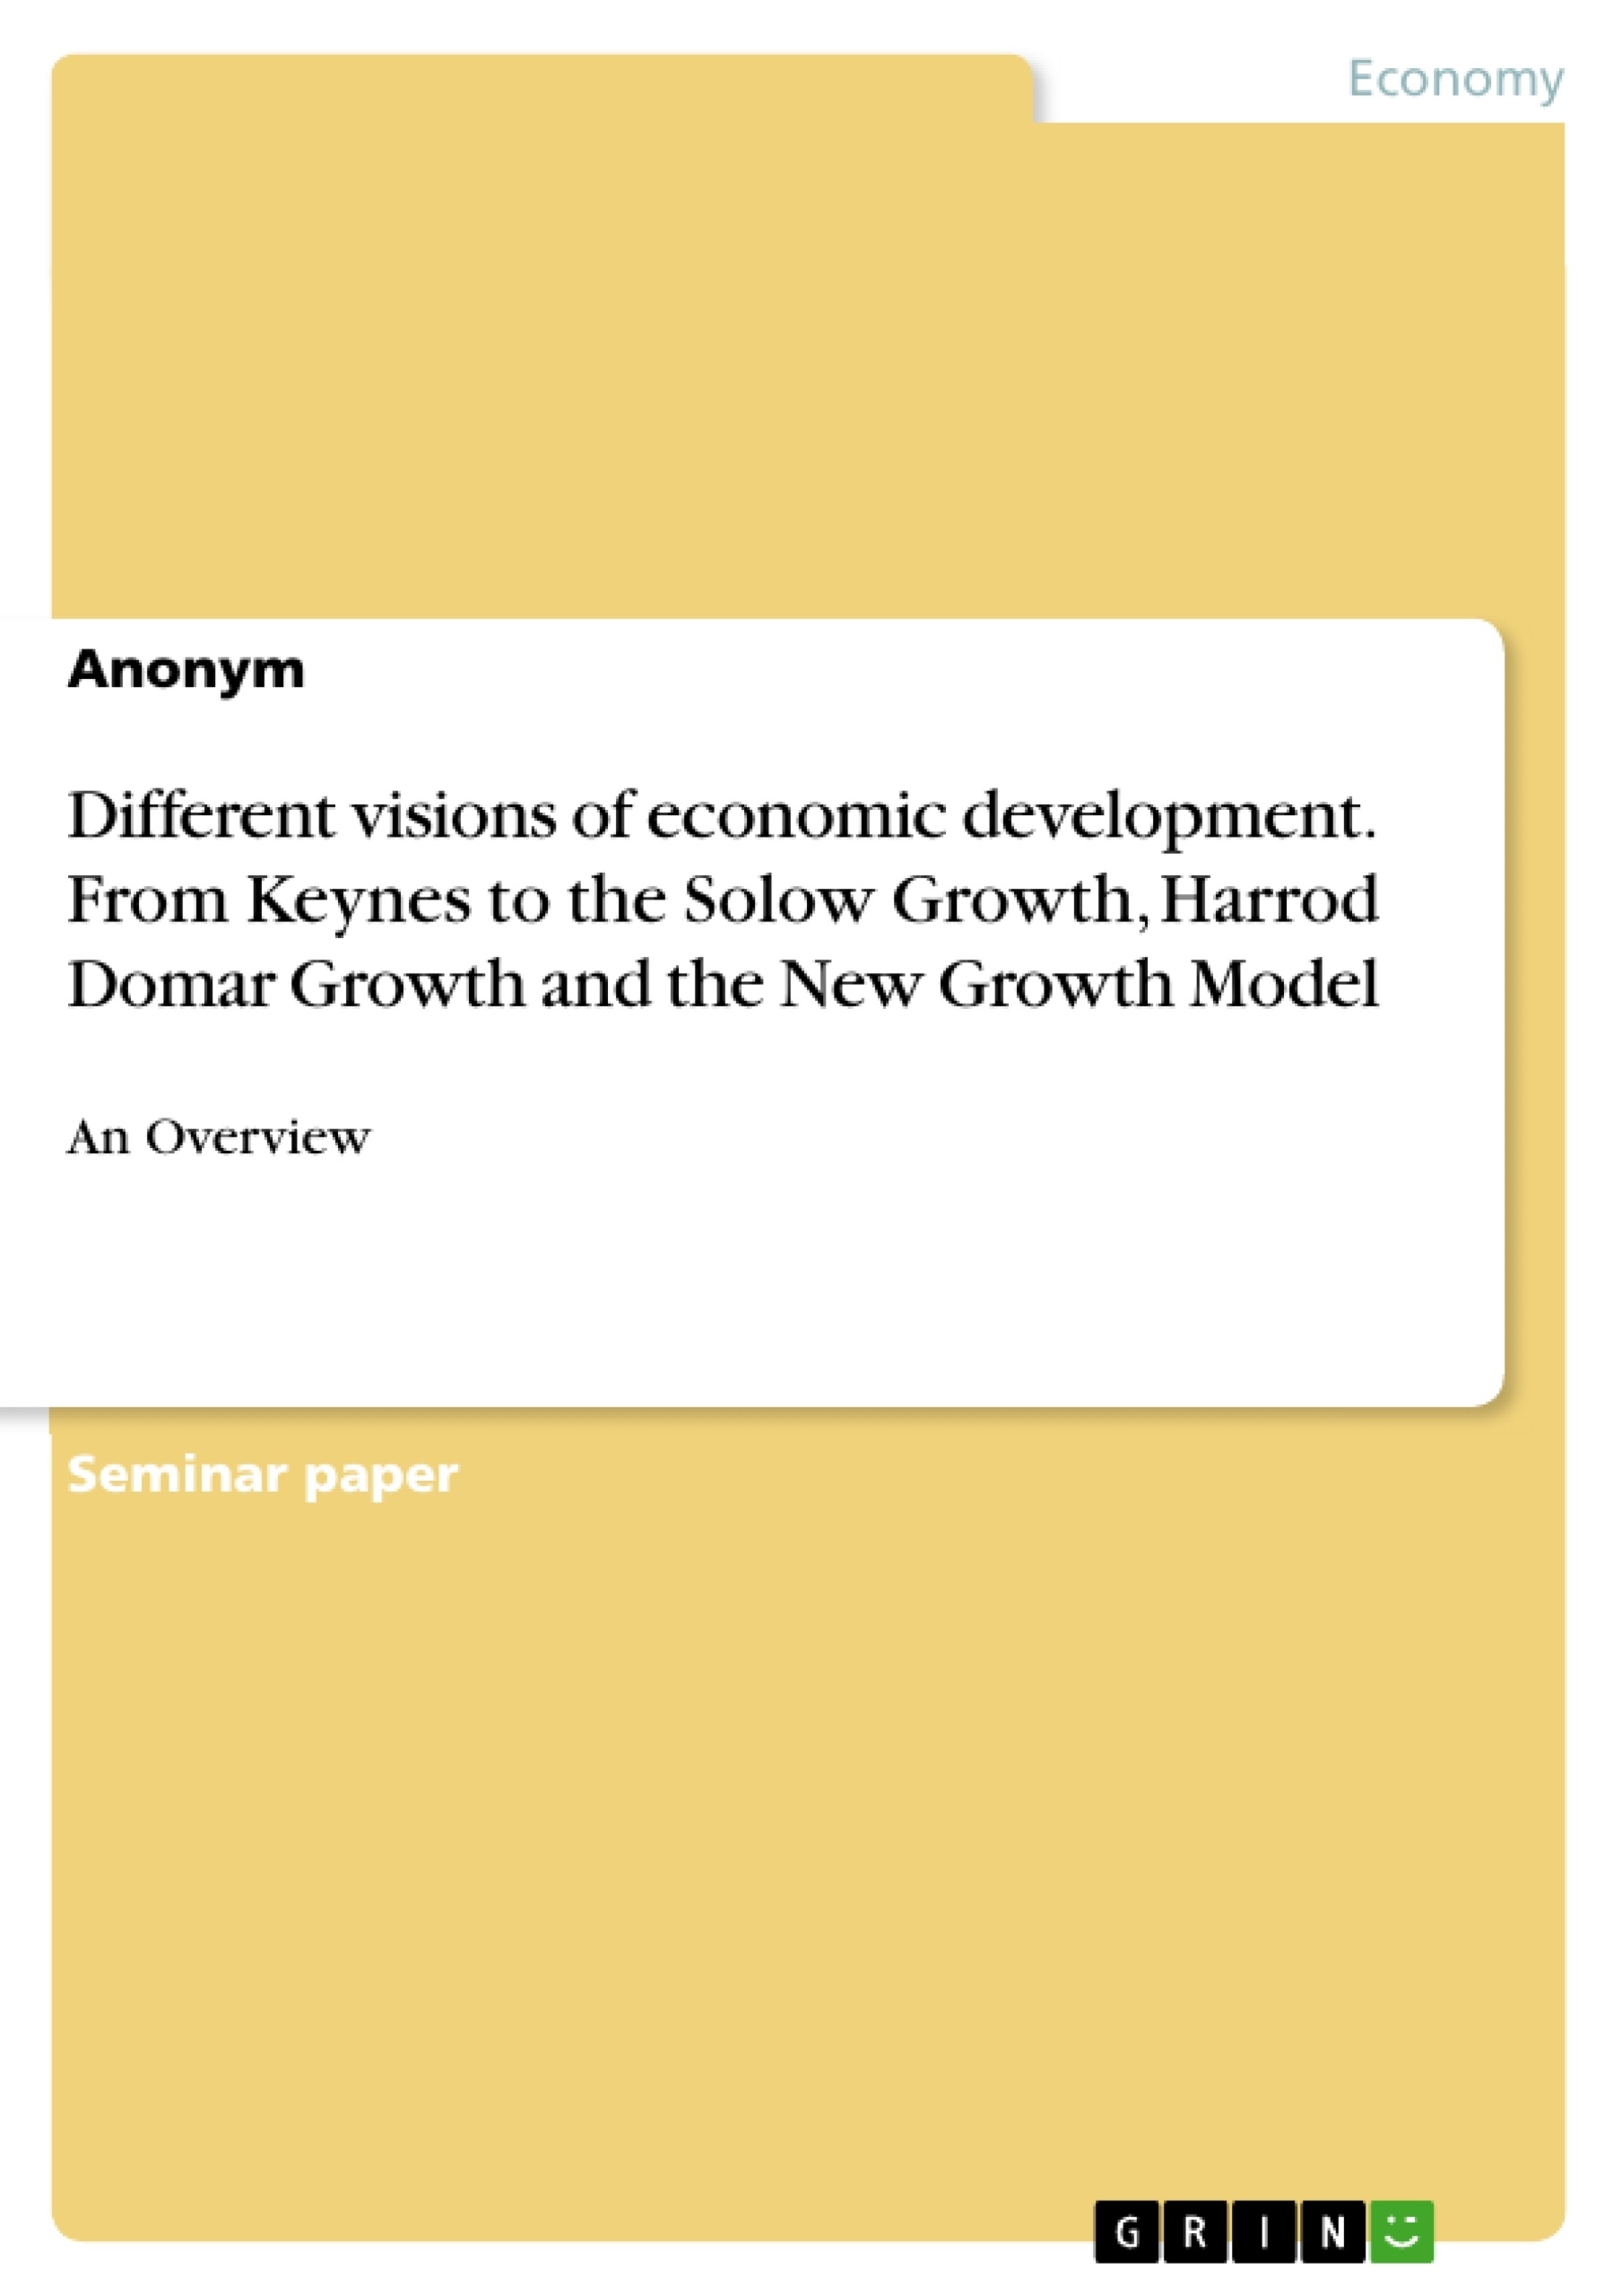 Título: Different visions of economic development. From Keynes to the Solow Growth, Harrod Domar Growth and the New Growth Model